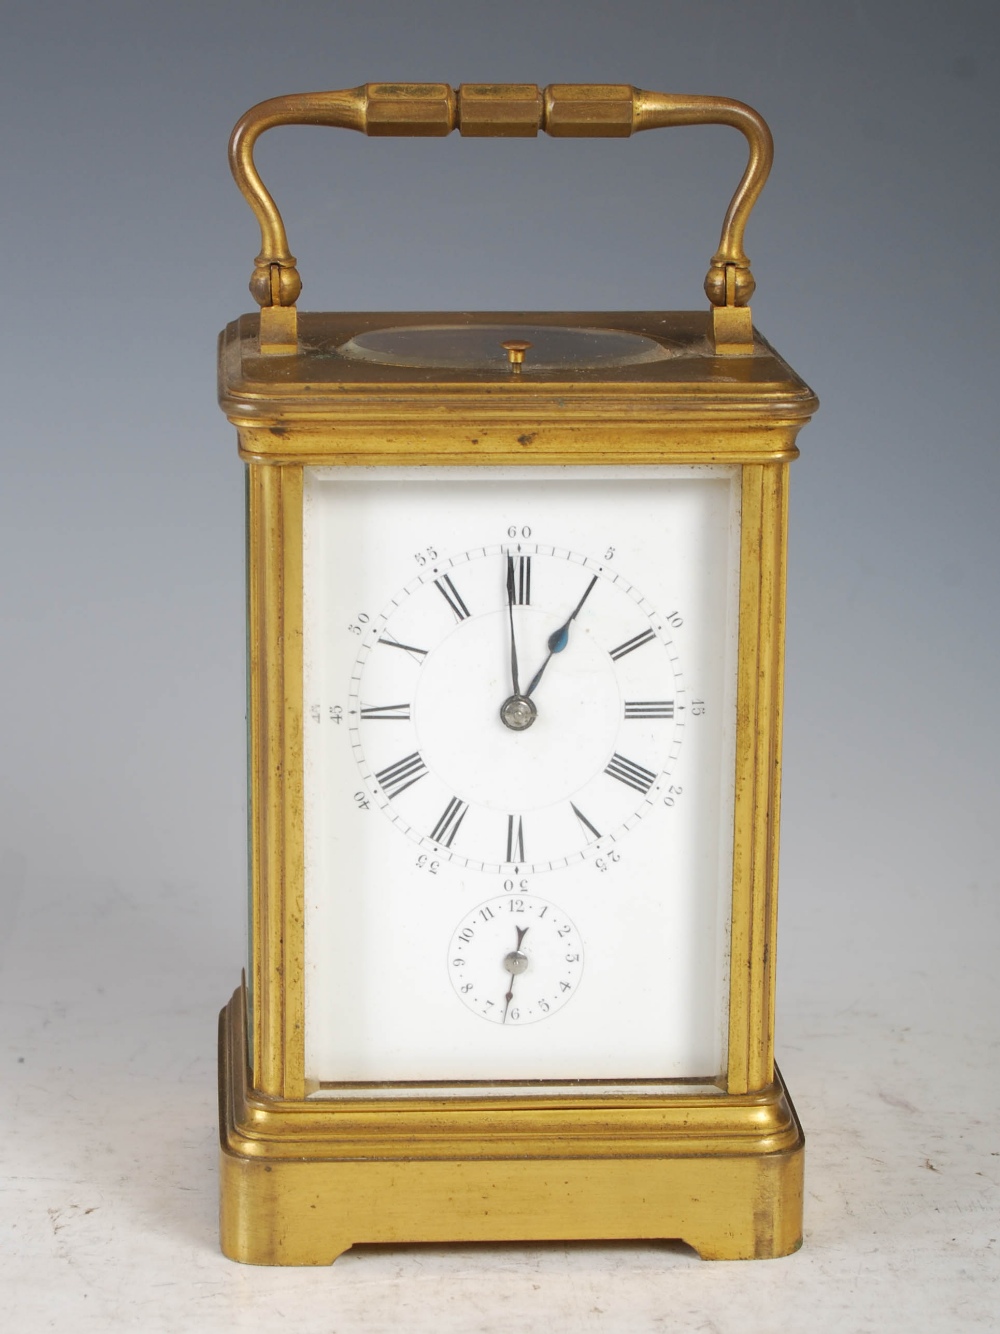 A 19th century brass cased repeater carriage clock with alarm, the white enamel dial with Arabic and